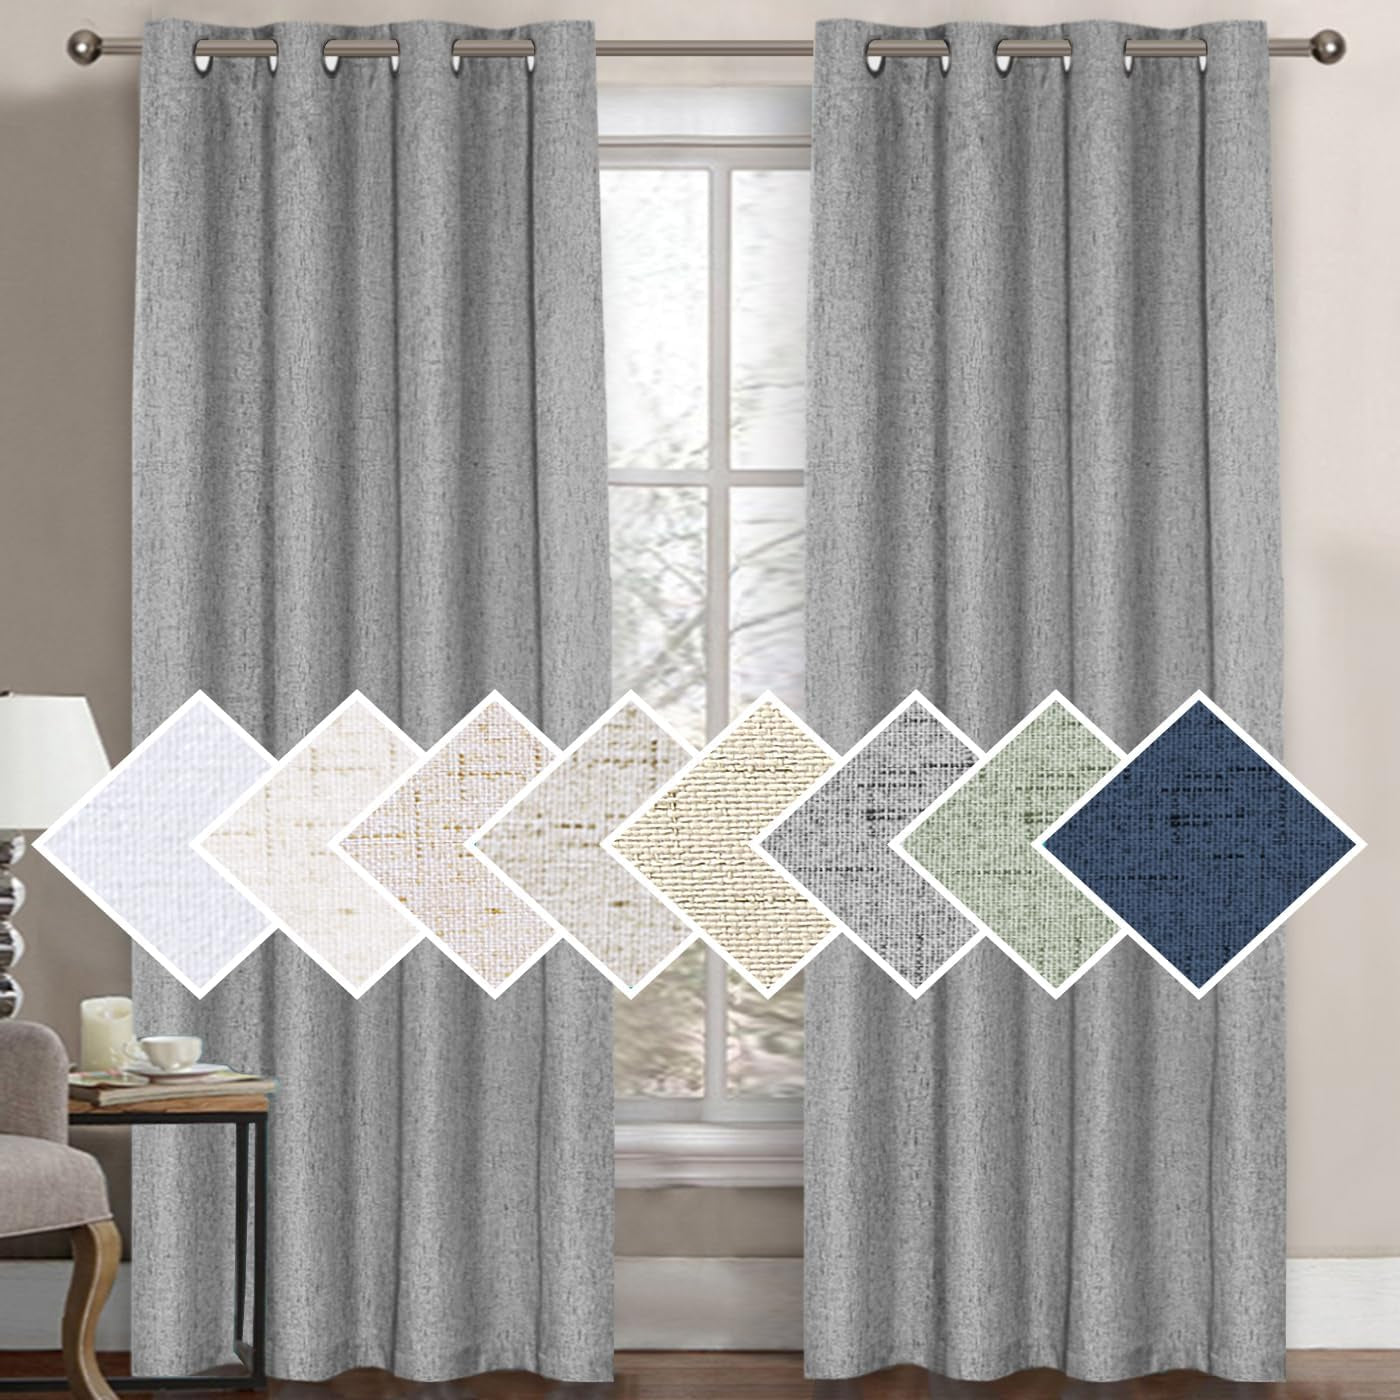 H.VERSAILTEX 100% Blackout Curtains for Bedroom Thermal Insulated Linen Textured Curtains Heat and Full Light Blocking Drapes Living Room Curtains 2 Panel Sets, 52X84 - Inch, Natural  H.VERSAILTEX Dove 1 Panel - 52"W X 96"L 